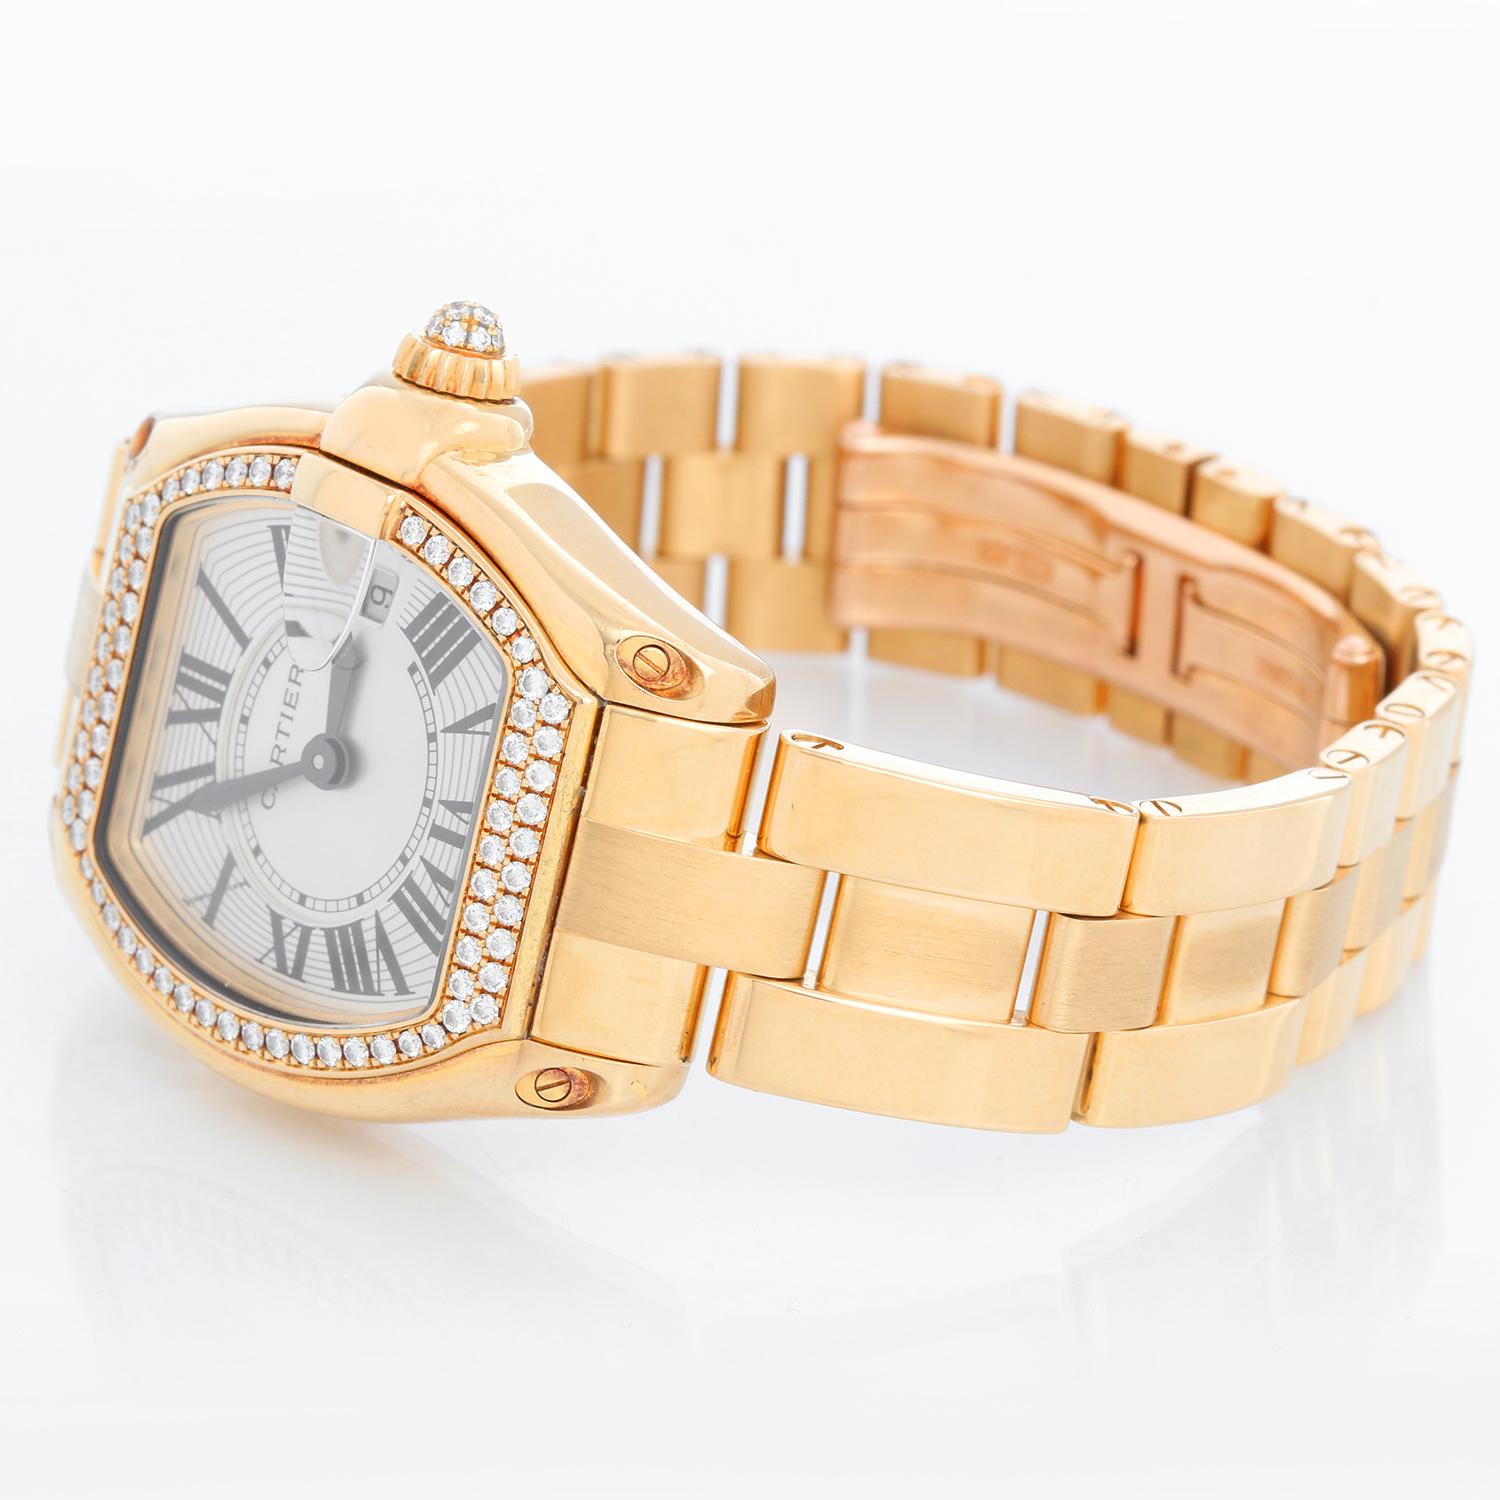 Cartier Roadster 18k Yellow Gold Quartz WE5001X1 2676 - Quartz. 18k yellow gold tonneau style case with diamond bezel  (31mm x 37mm). Silver guilloche dial with black Roman numerals; date at 3 o'clock. 18k yellow gold Cartier bracelet with deployant